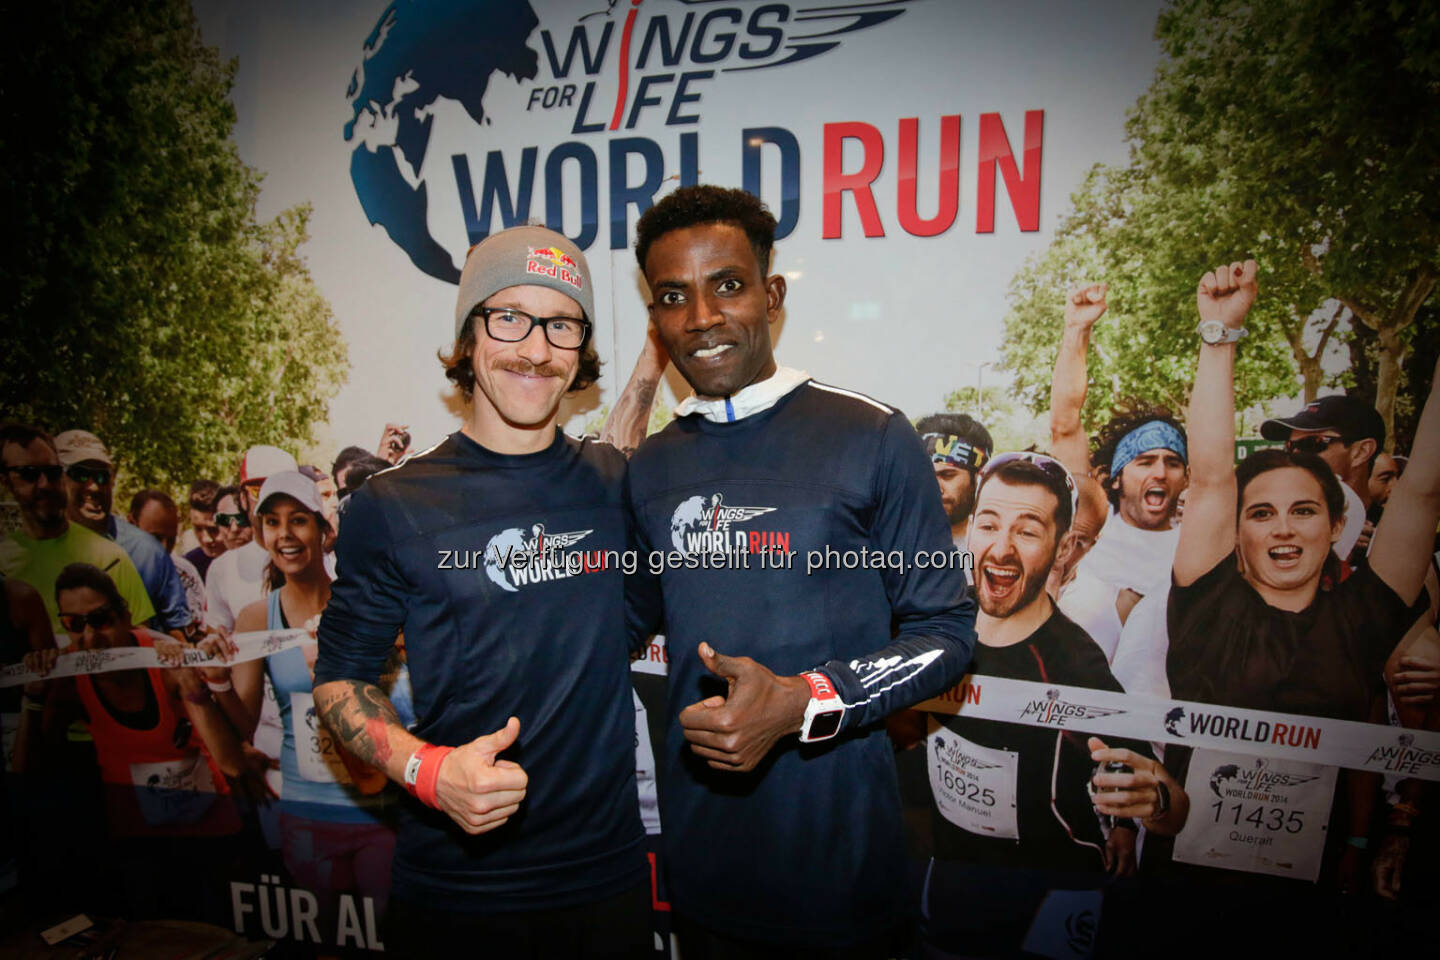 Florian Neuschwander and 
Lemawork Ketema with participants at the Wings for Life World Run event in Munich 23rd of January 2016 (Bild: Daniel Grund)